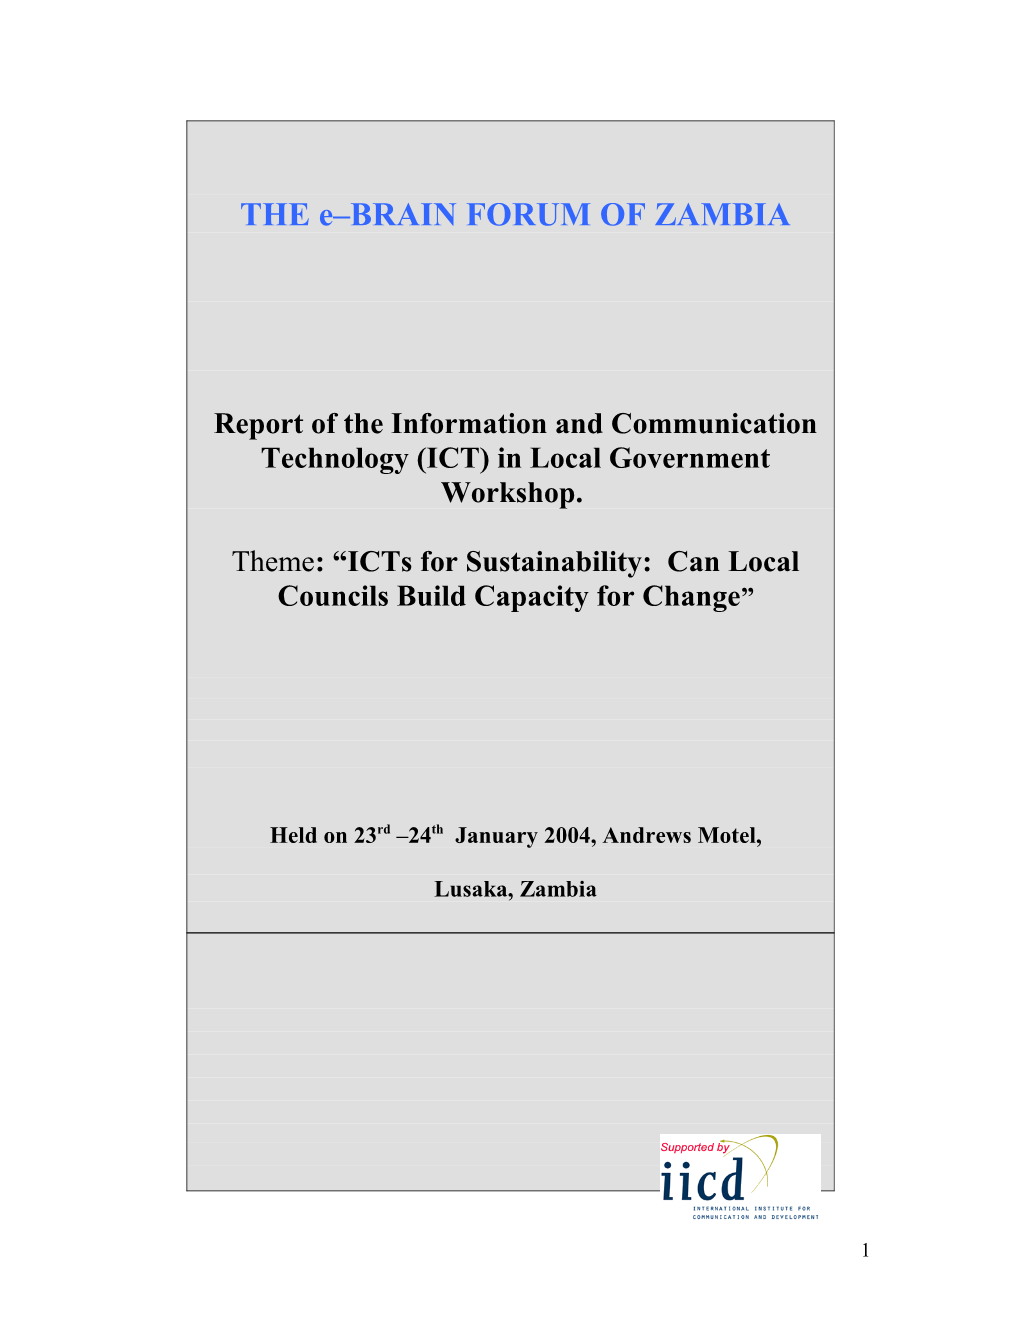 Report of the Information Communication Technologies (Ict) in Local Government Conference